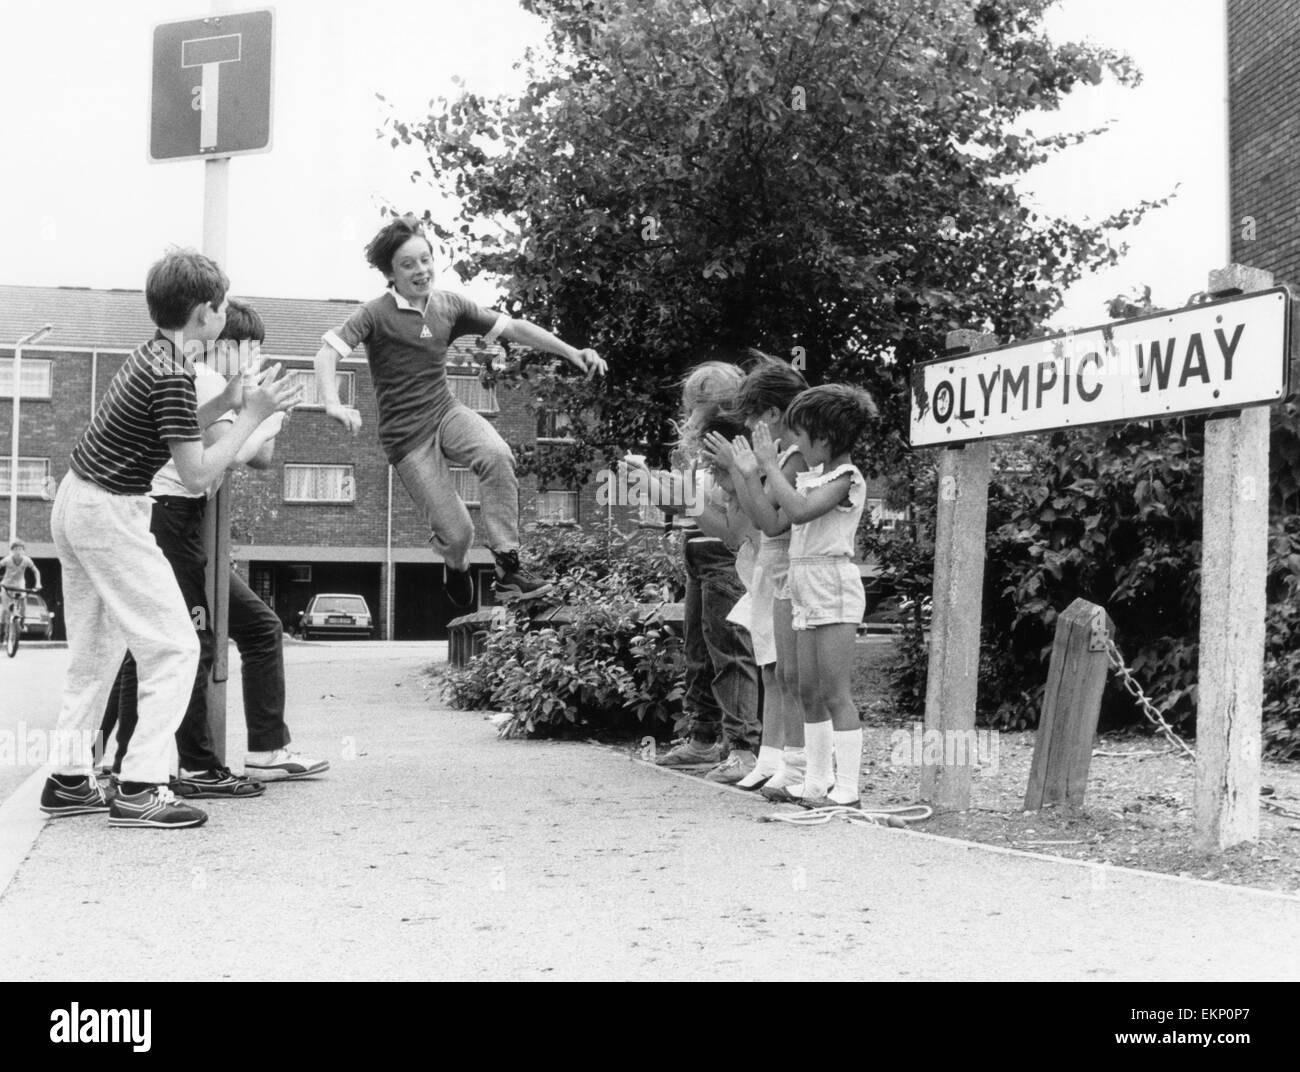 6000 miles from where the Los Angeles Olympics are being held, you can find a group of children contesting their very own 'Unofficial' Olympics in Olympic Way, Greenford, Middlesex 7th August 1984. Stock Photo